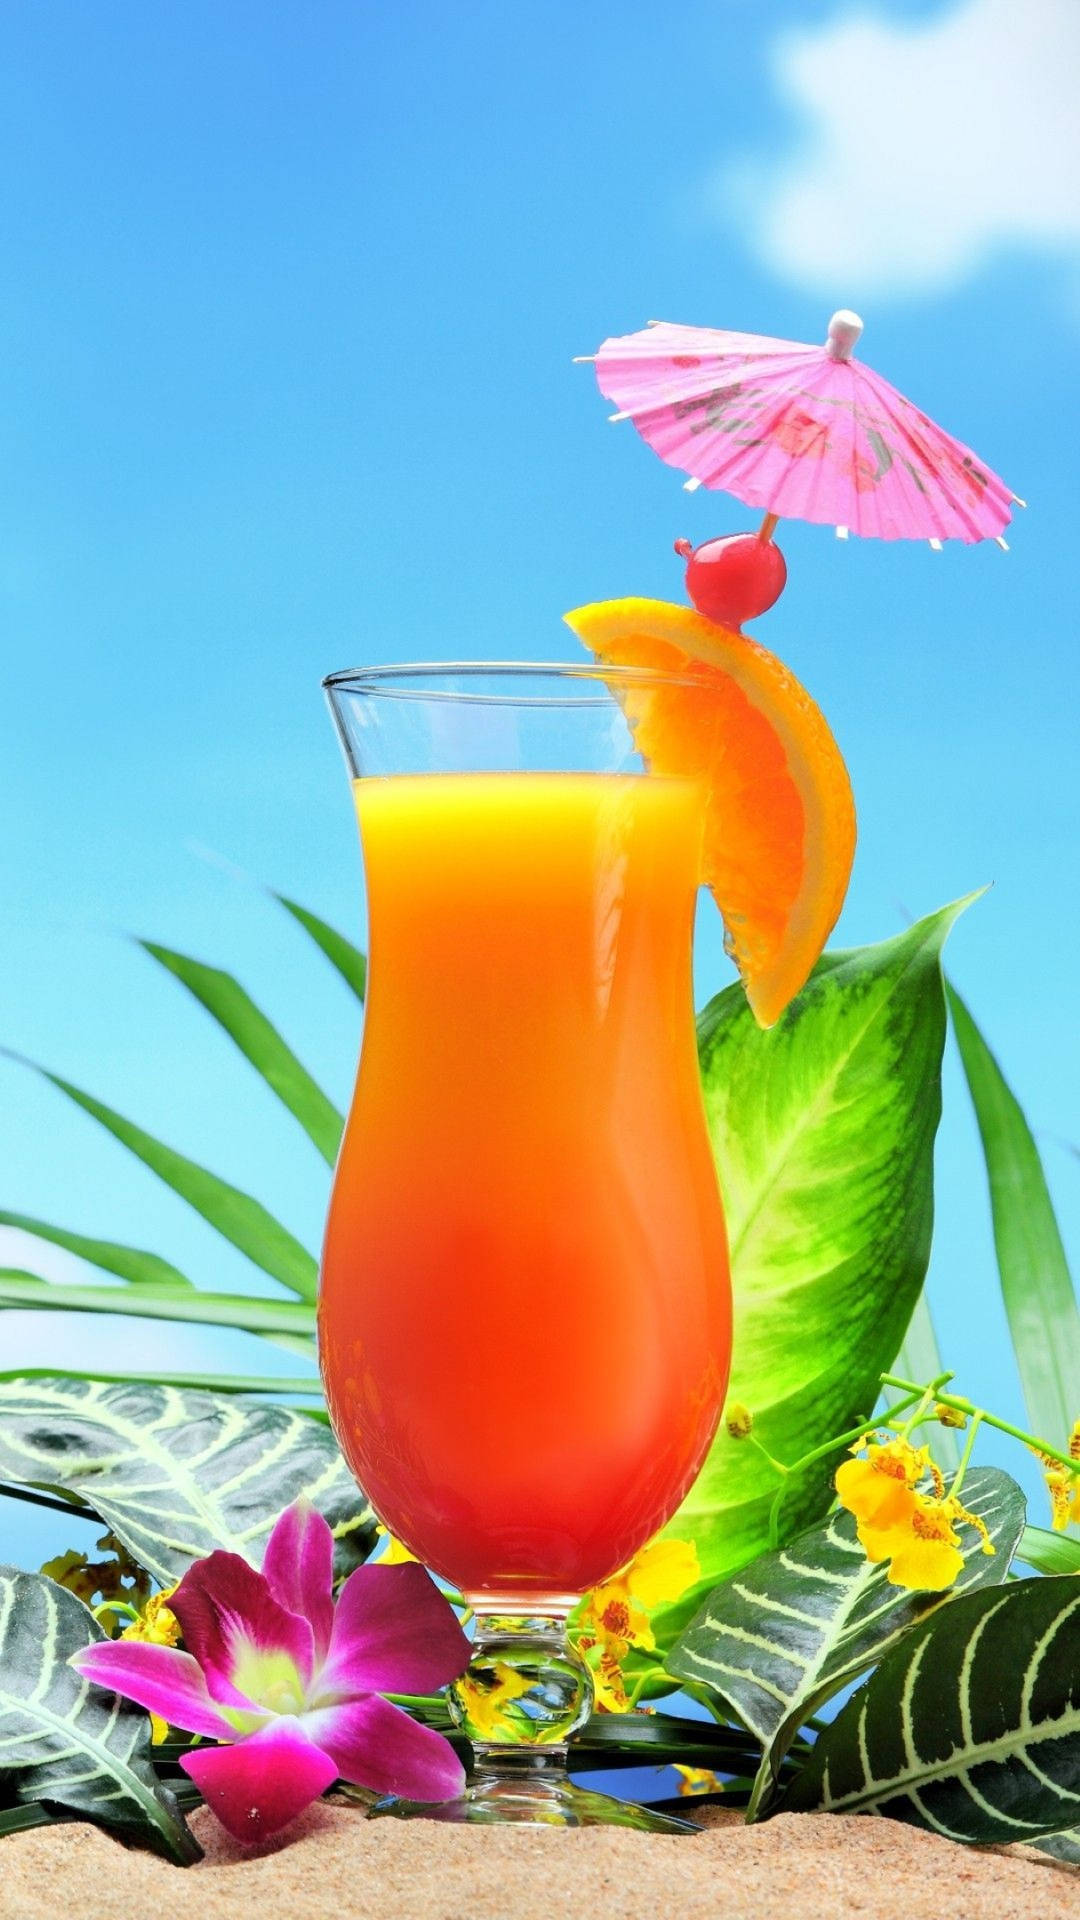 Tequila Sunrise Tropical Drink Background